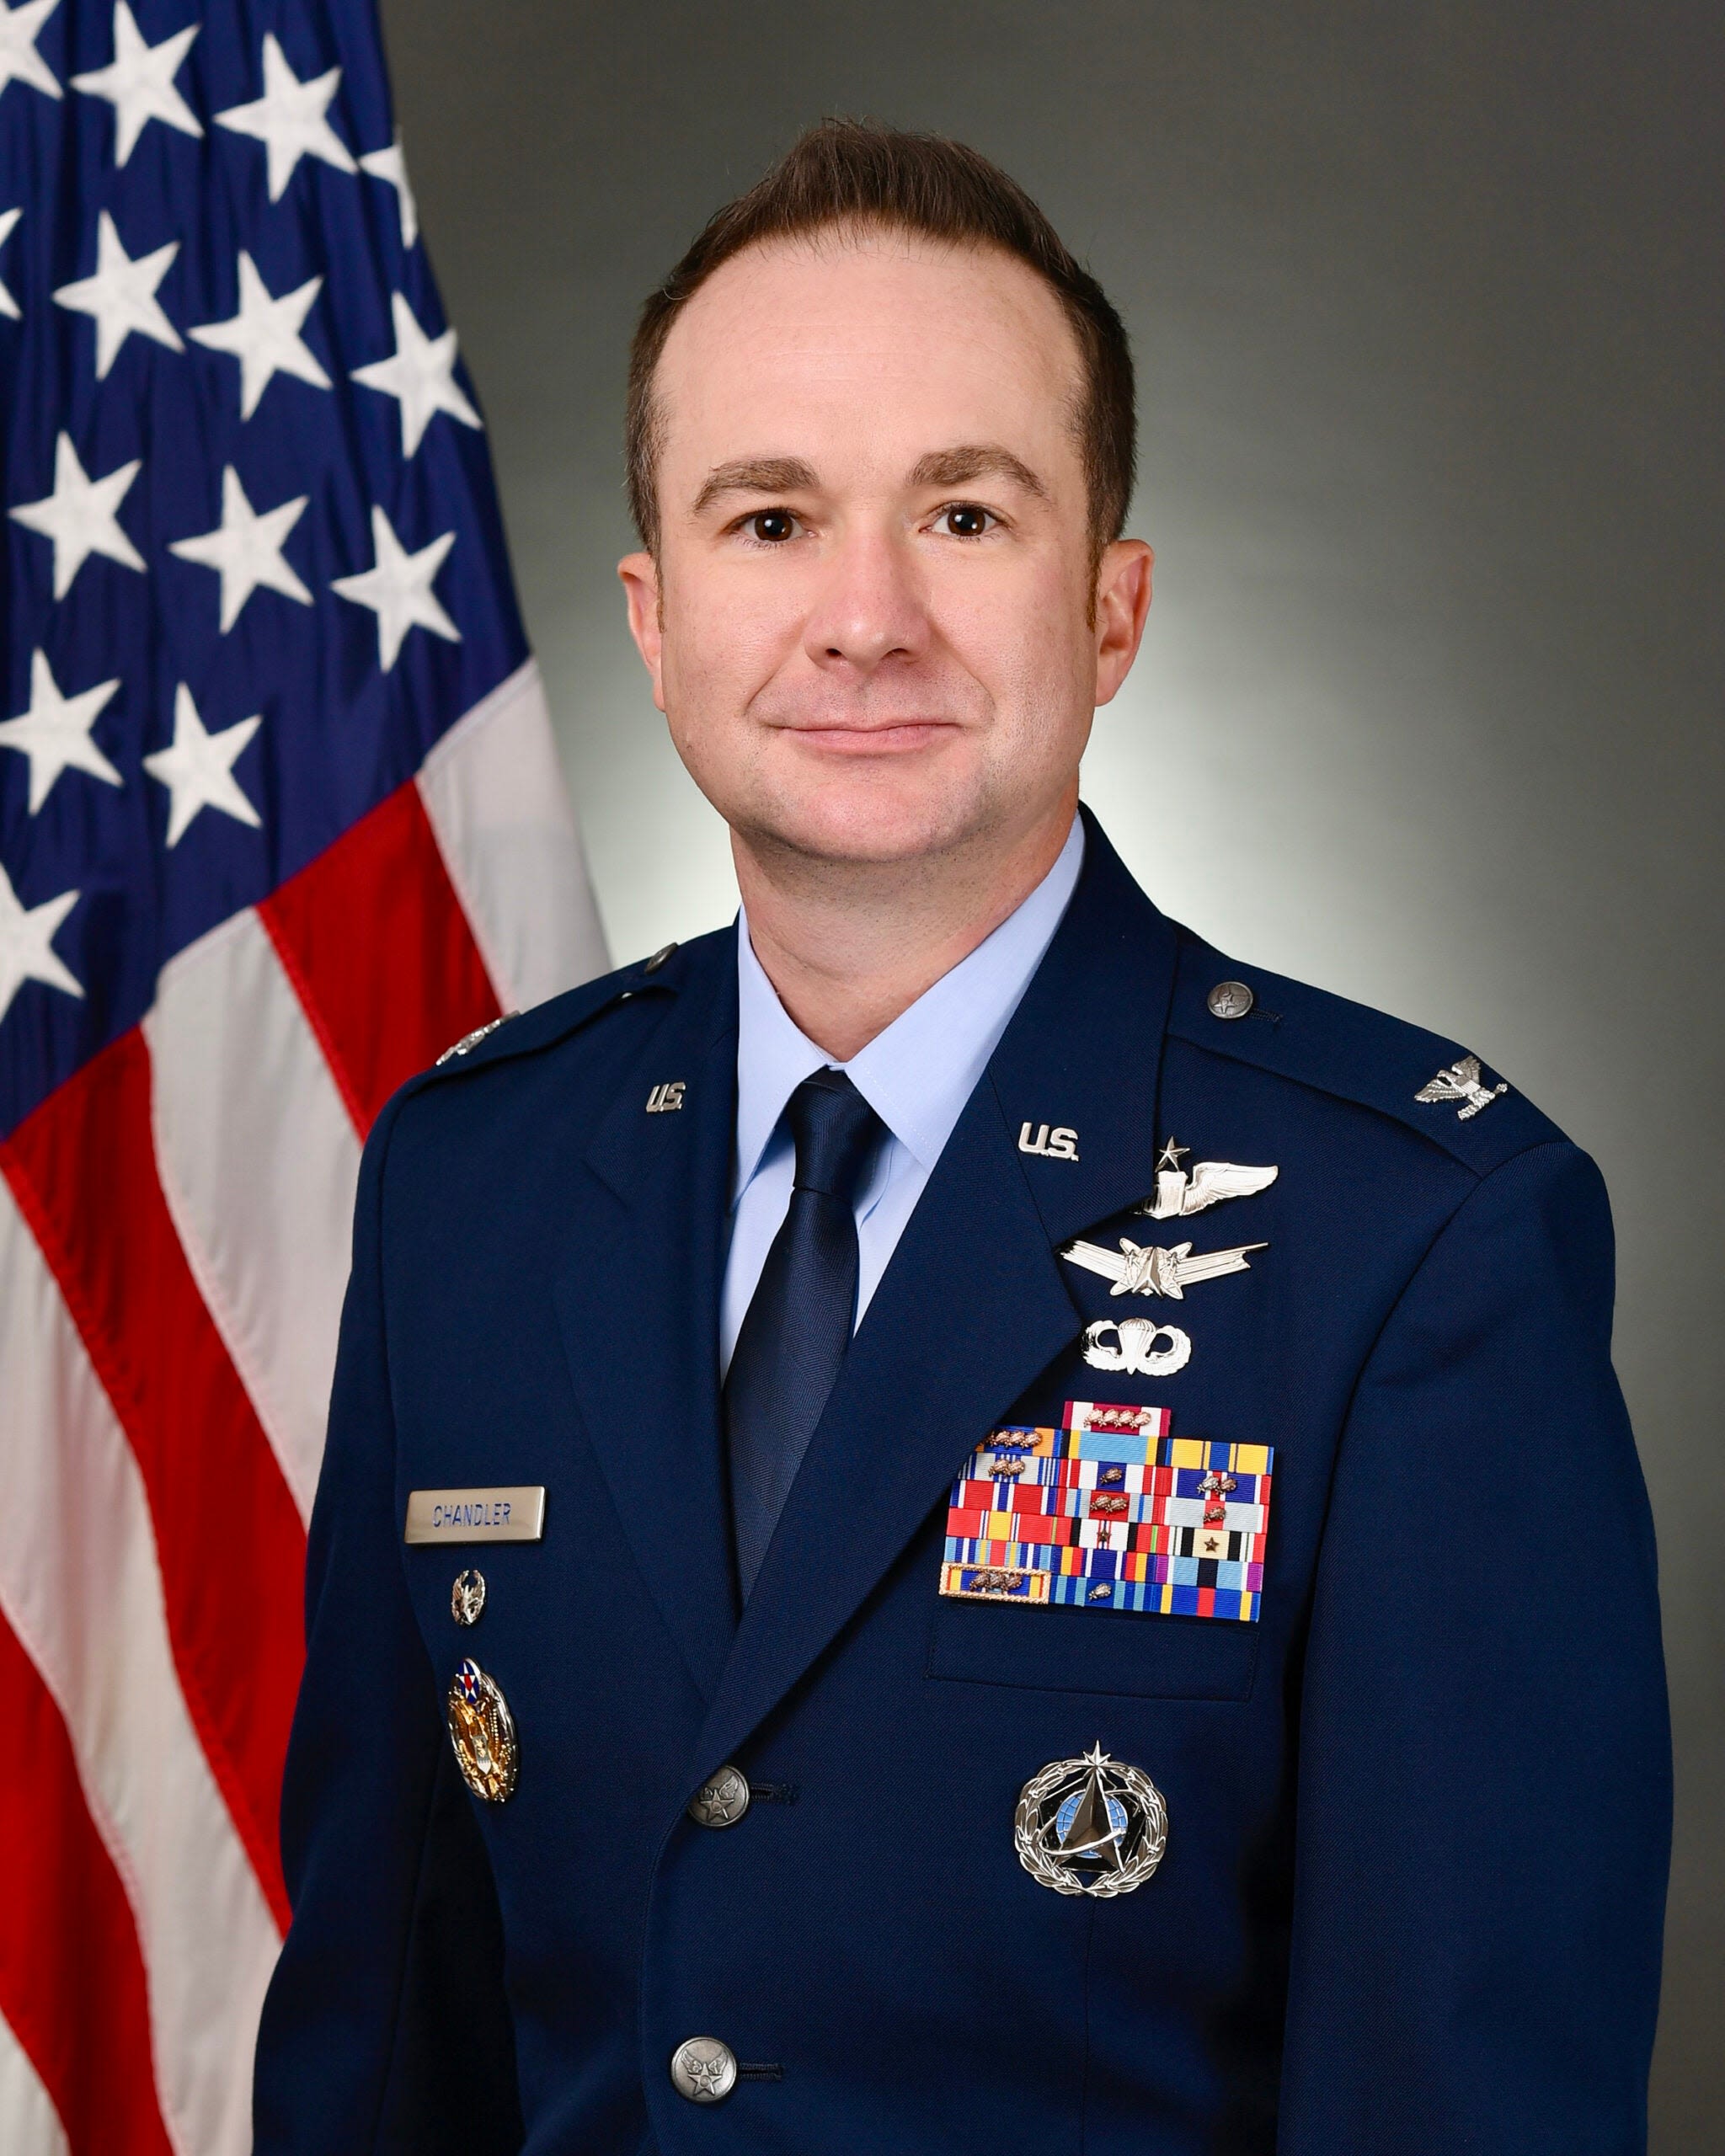 West Rowan grad retires from Air Force to join aerospace company - Salisbury Post